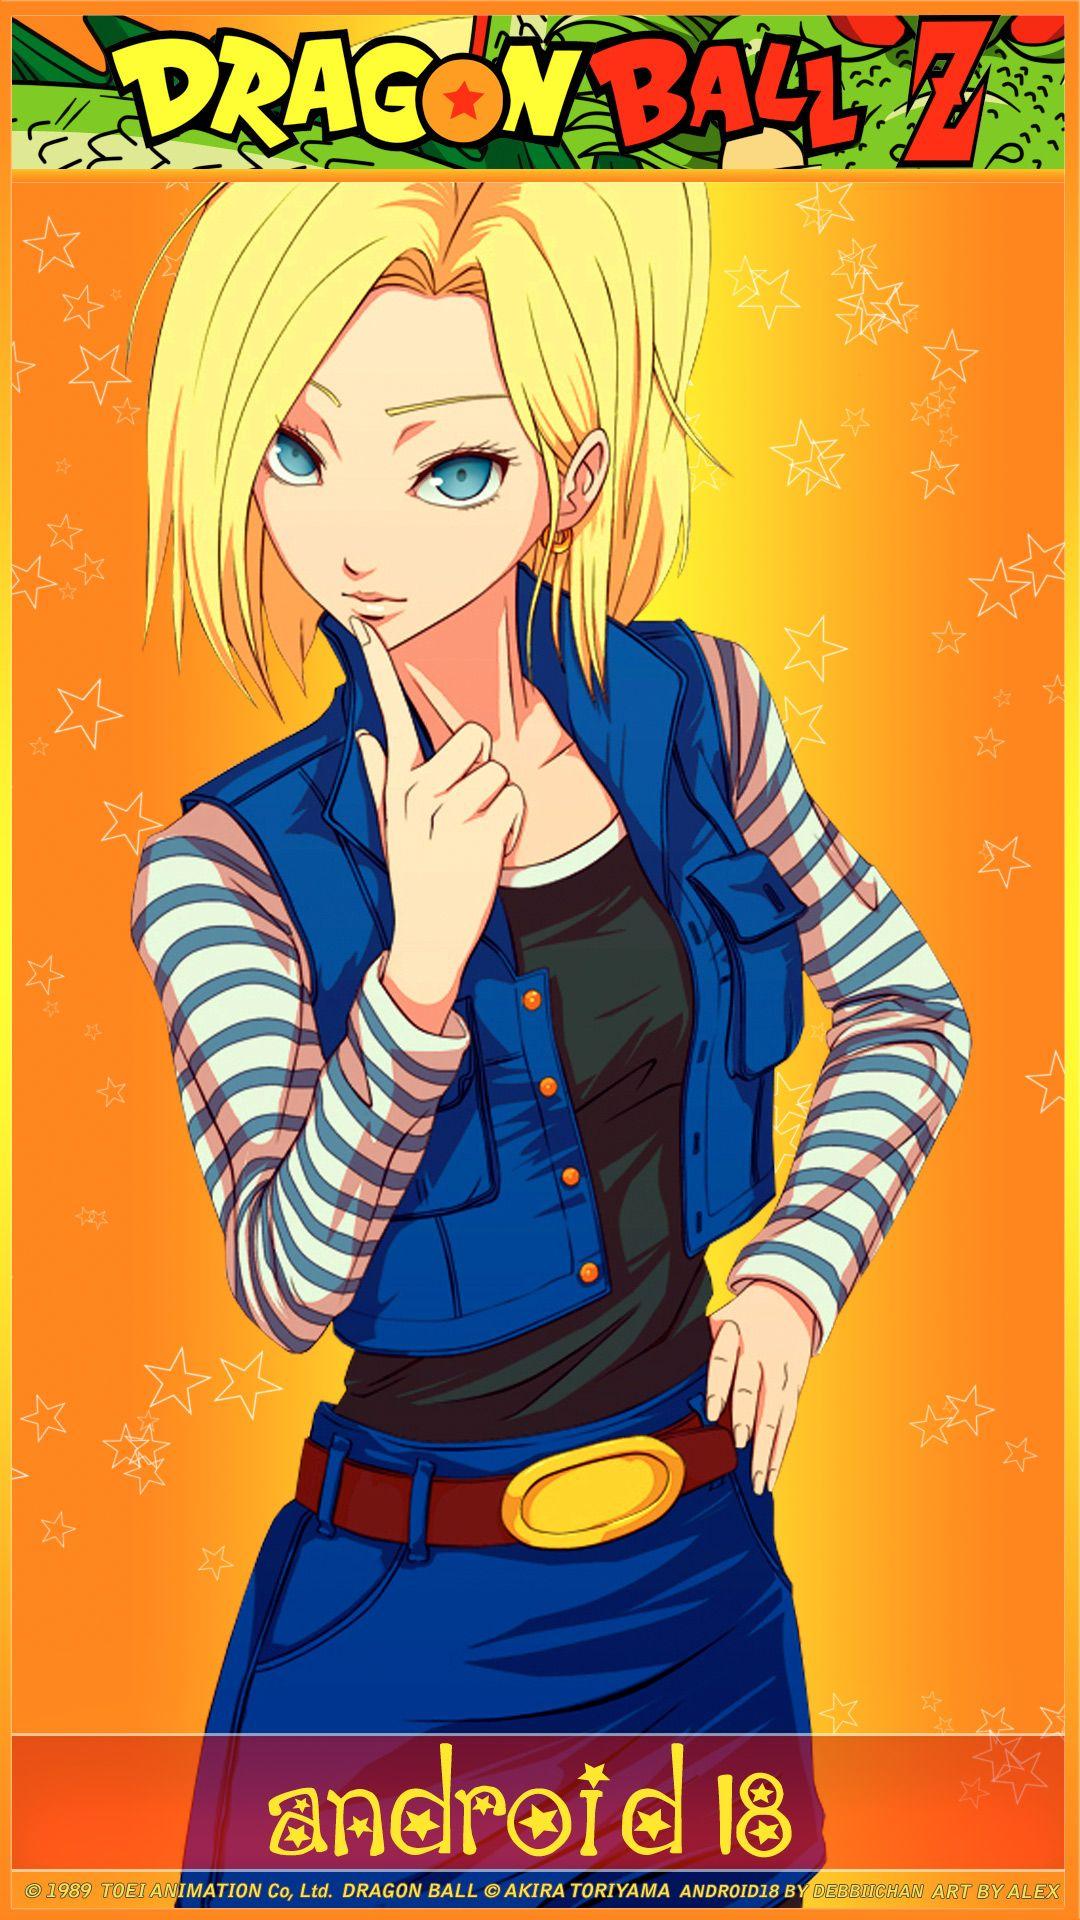 Dragon Ball Z Android 18 Anime iPhone Wallpaper. Free Computer